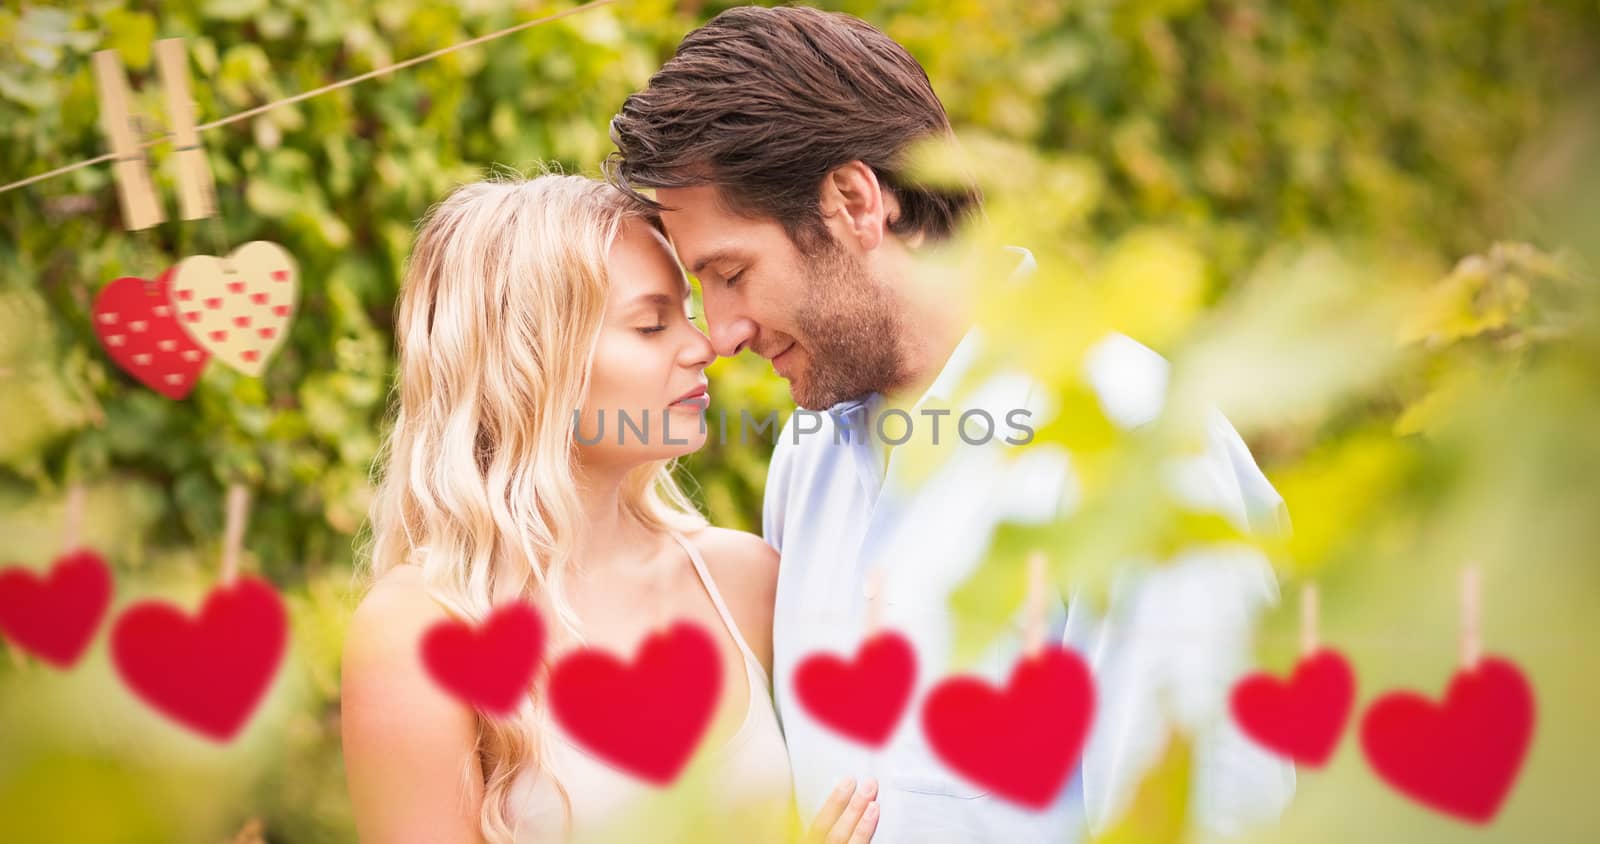 Composite image of young romantic couple embracing each other by Wavebreakmedia